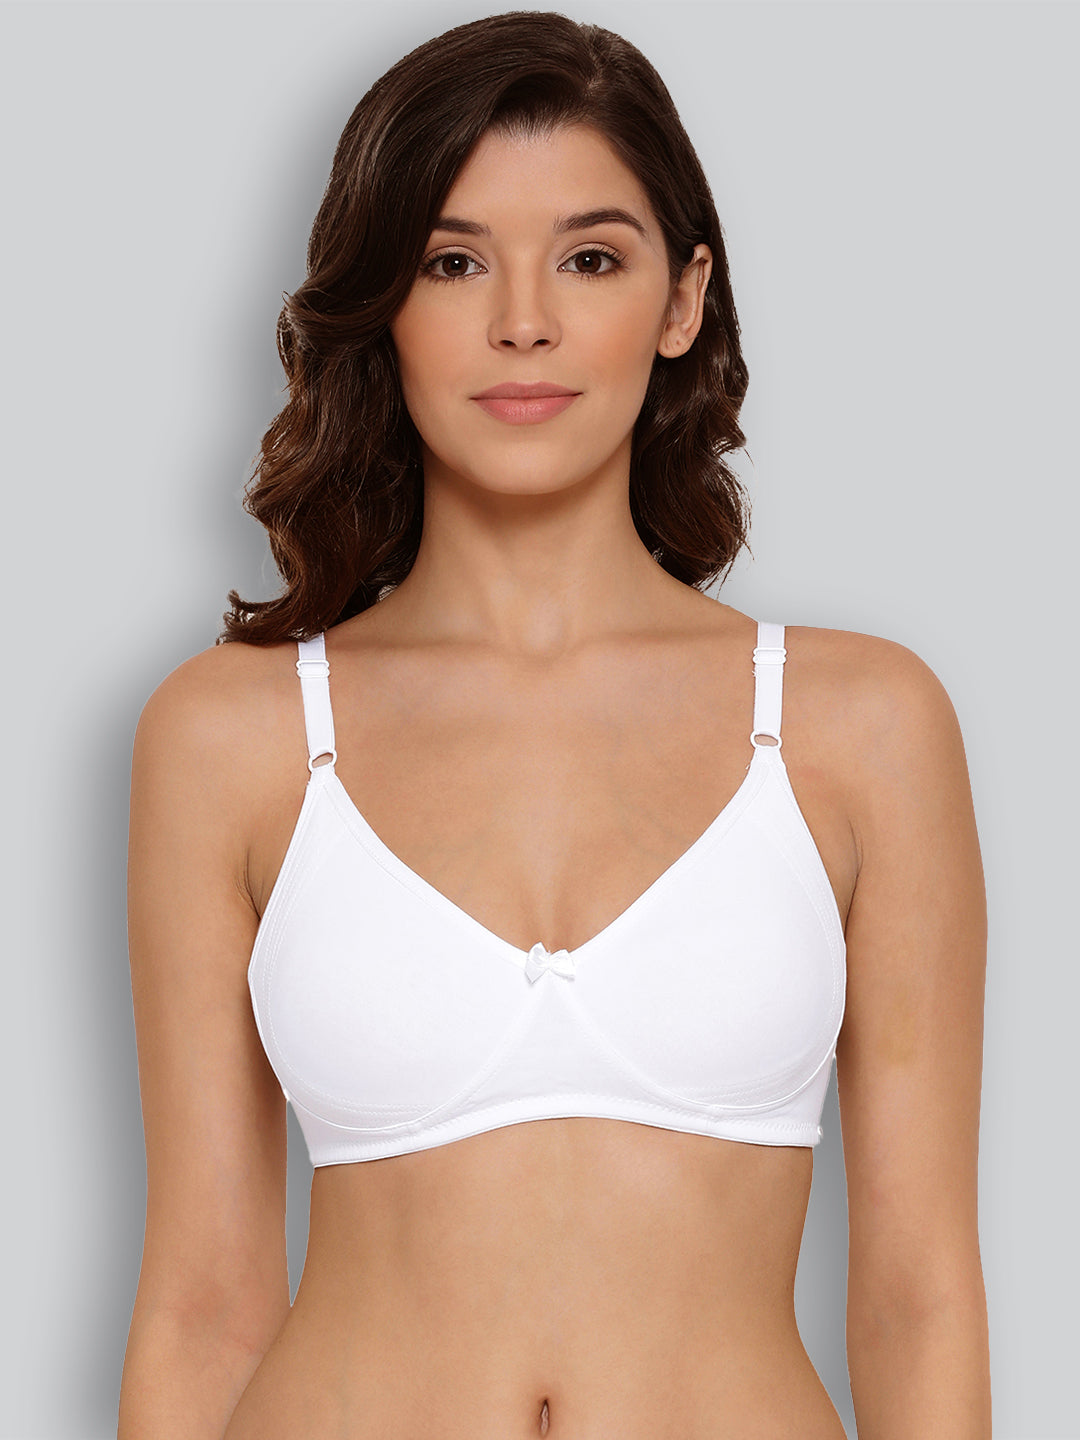 Buy Lyra Women's Moulded Encircled Bra(513) Pack of 2 White Black,30B  2PC_Black REDLOVE Online In India At Discounted Prices